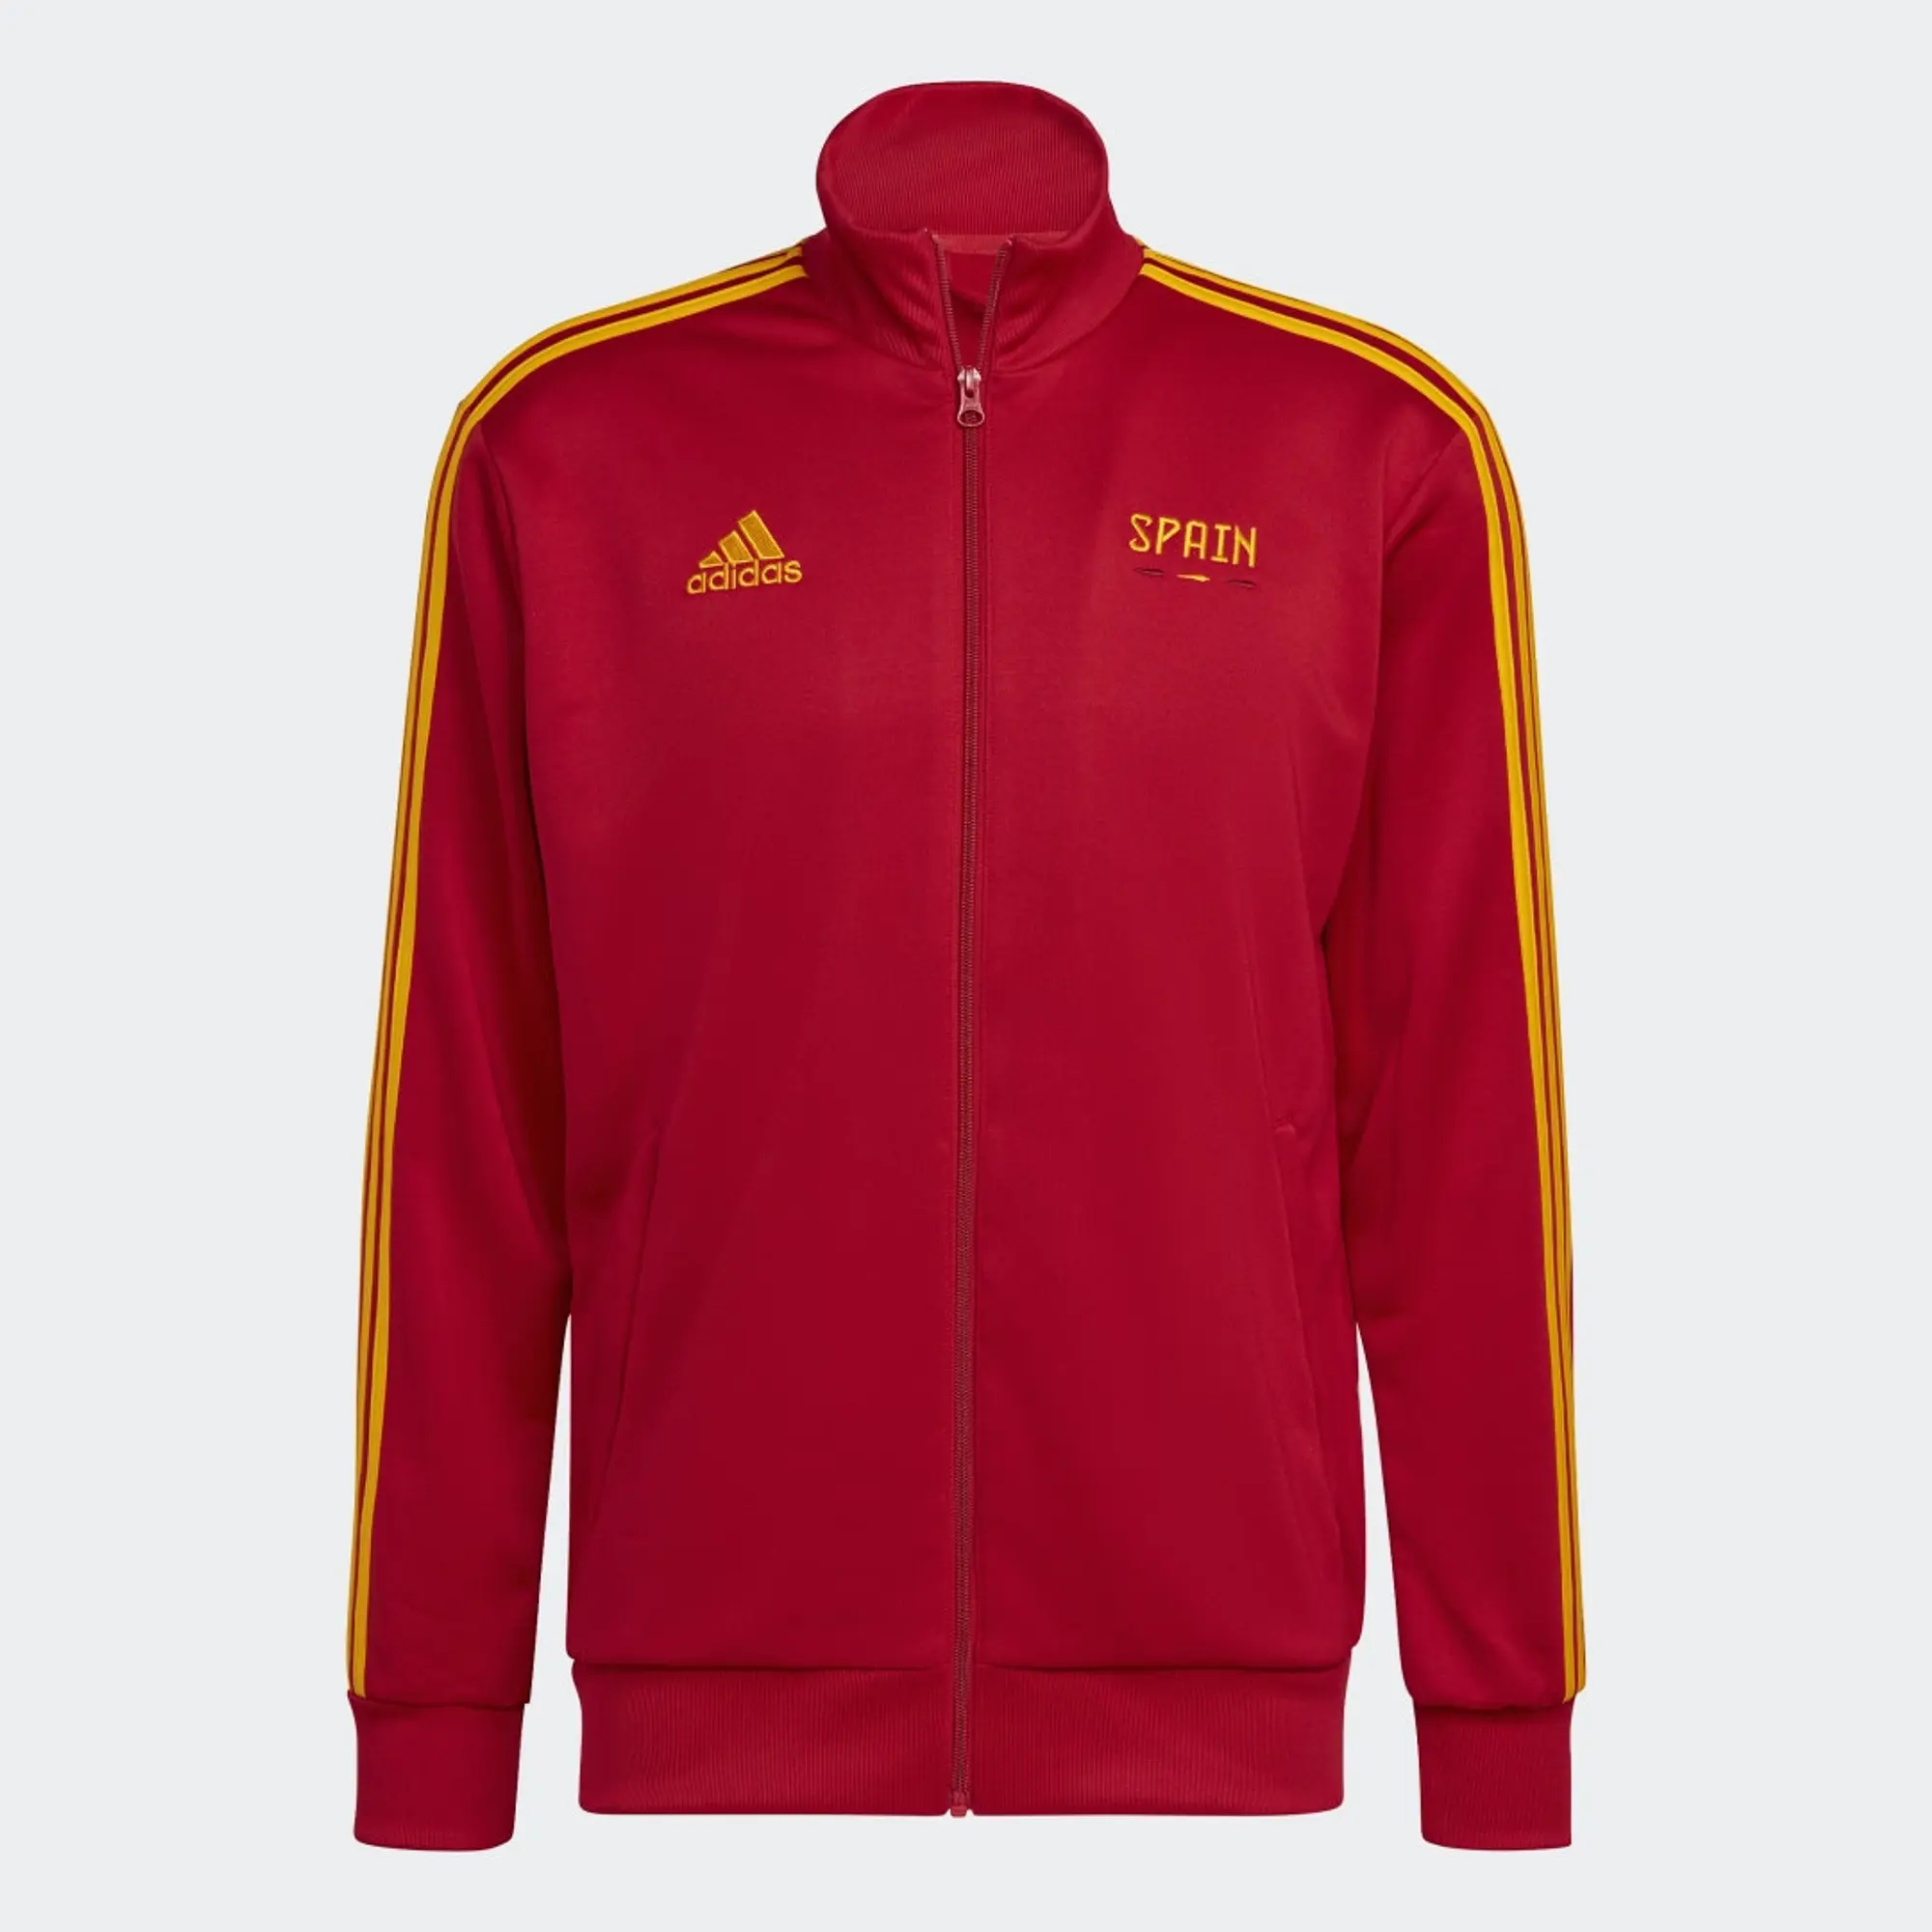 adidas Fifa World Cup 2022™ Spain Track Top